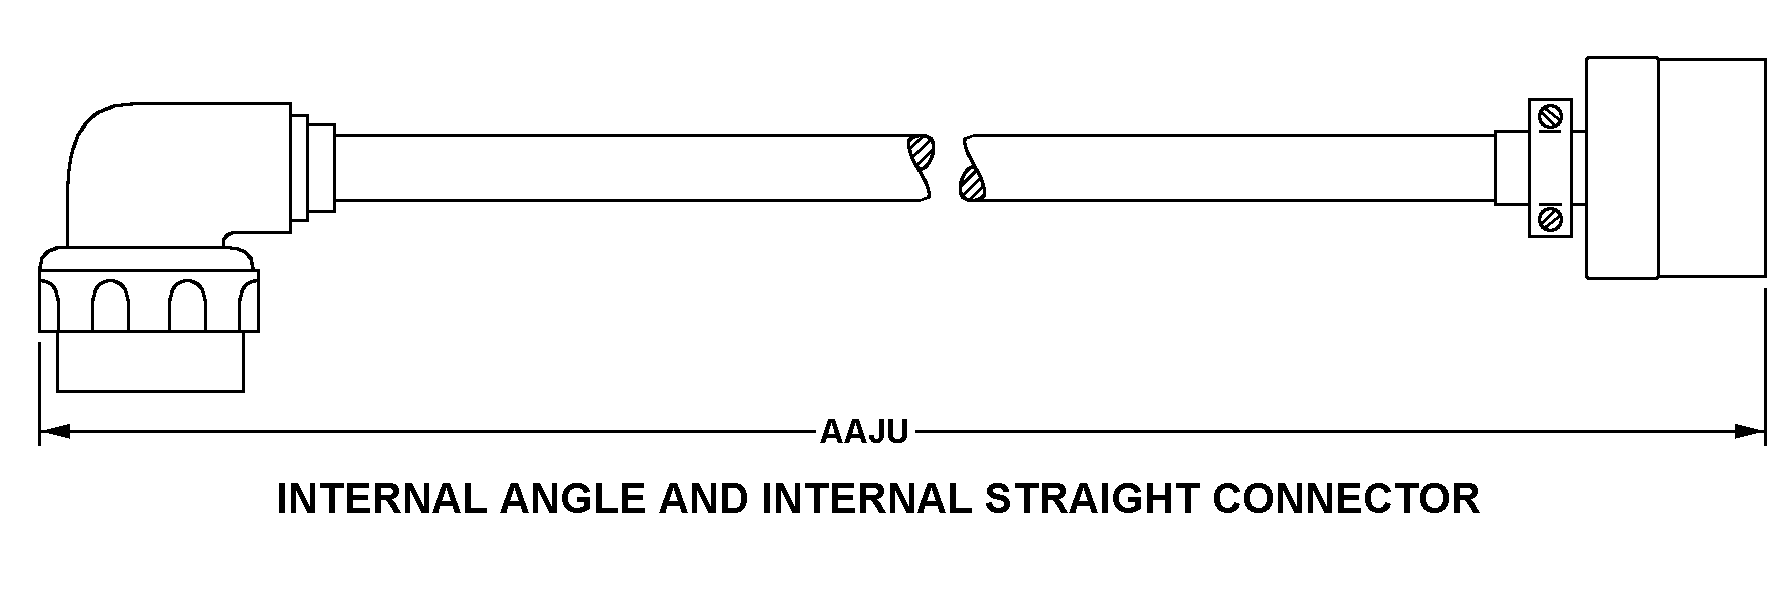 INTERNAL ANGLE AND INTERNAL STRAIGHT CONNECTOR style nsn 5995-01-174-7816